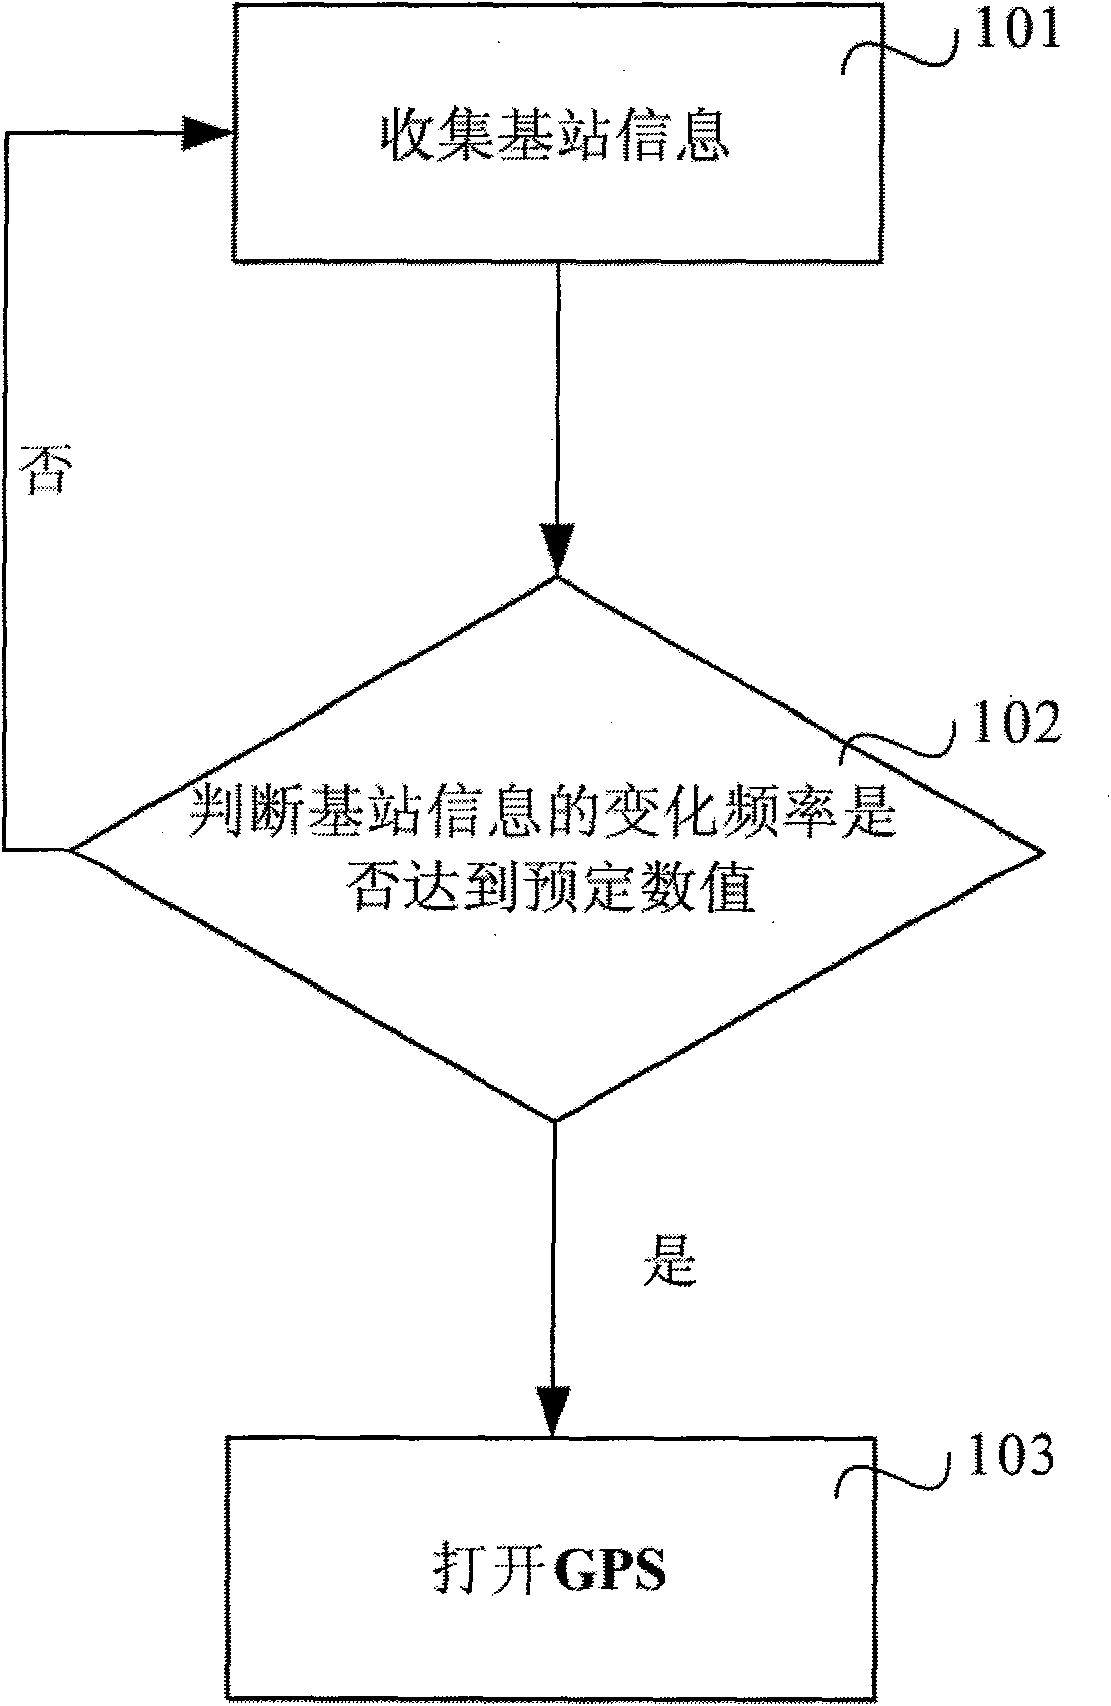 Method and system for controlling working of mobile station GPS